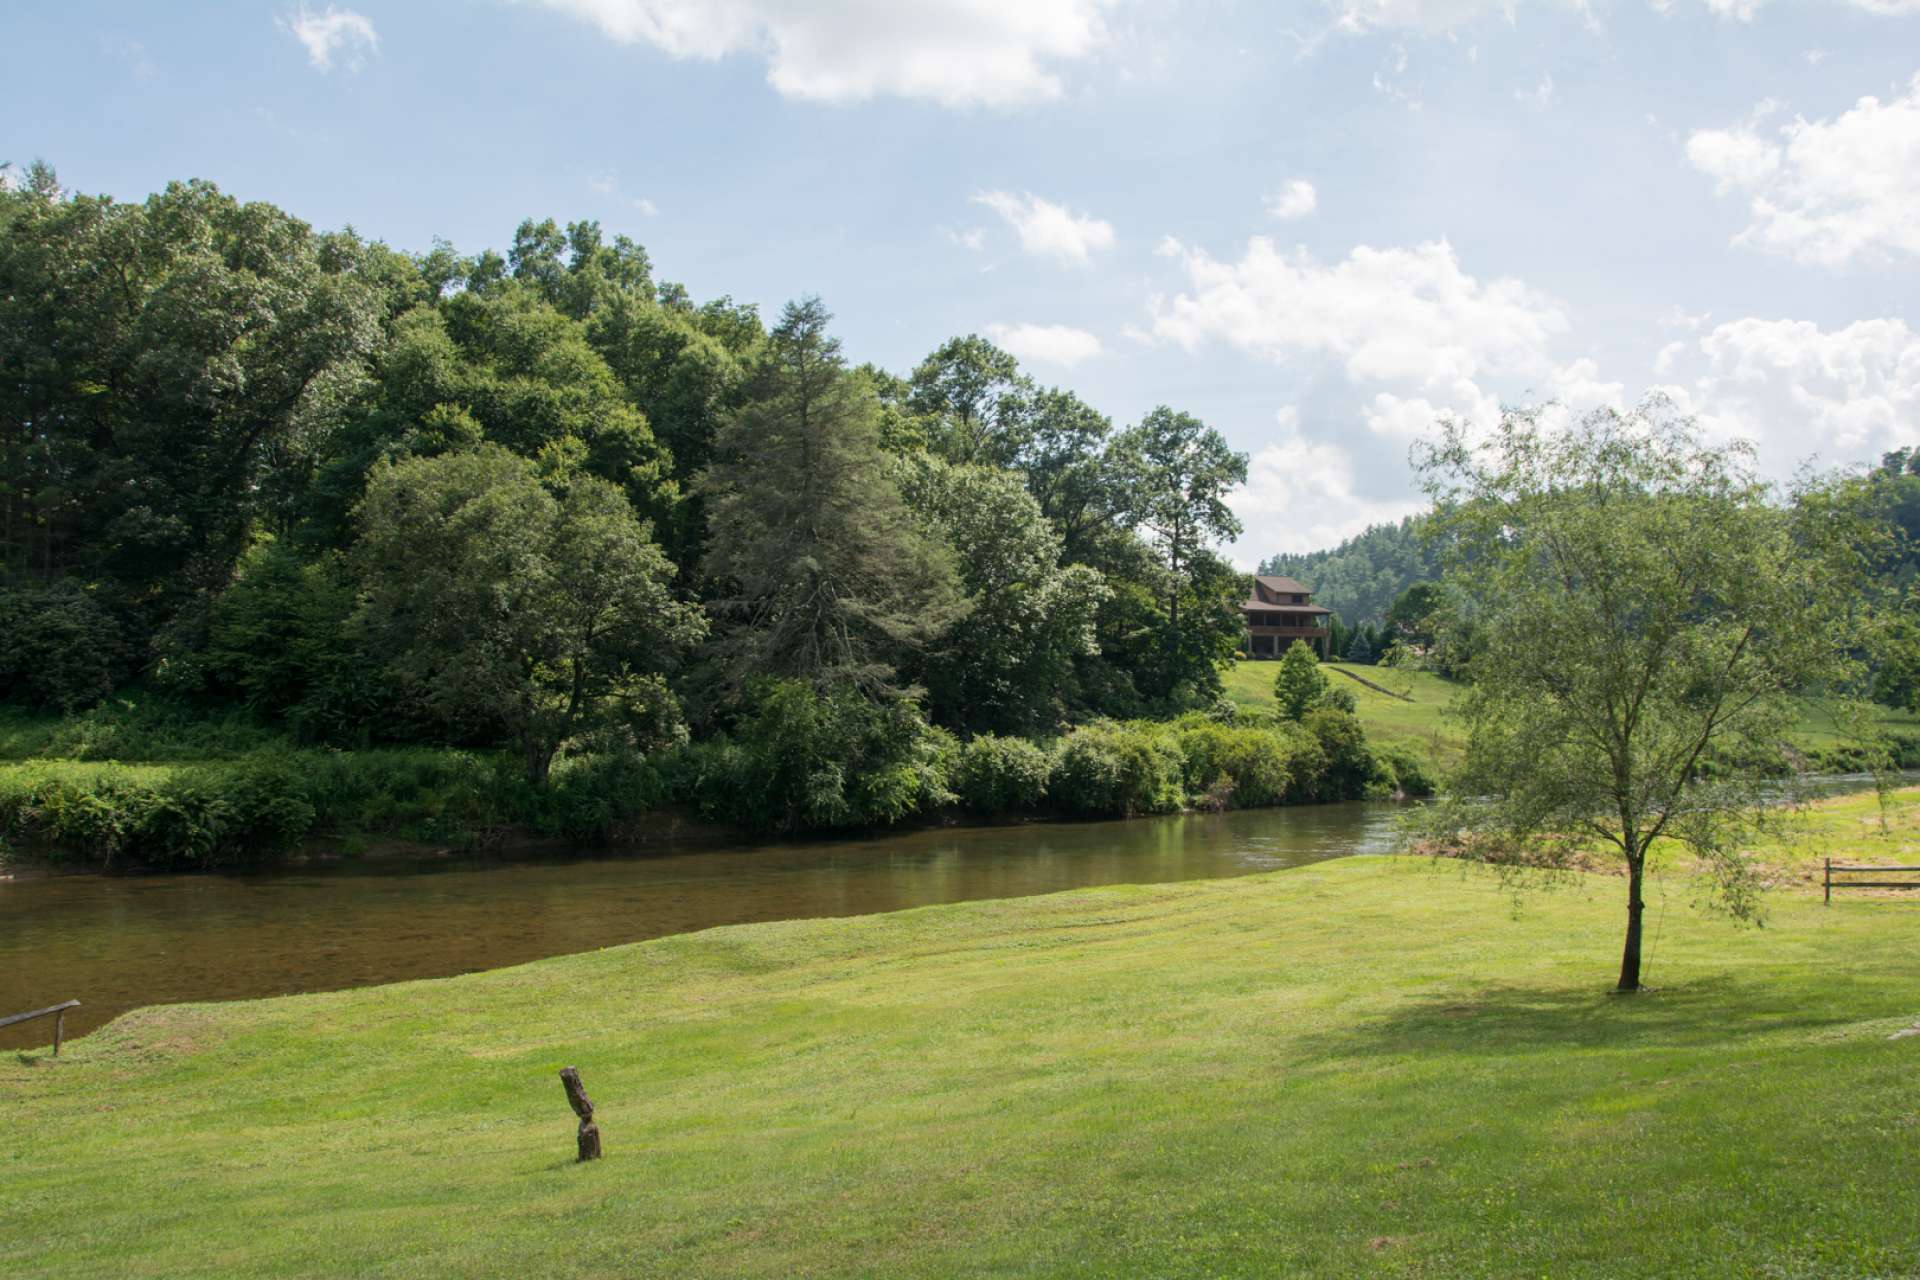 Easy access to the river for kayaking, tubing, fishing or just wading. And then enjoy sharing stories, good food, and making memories in the outdoor barbeque area with the sounds of the river and surrounding mountains.